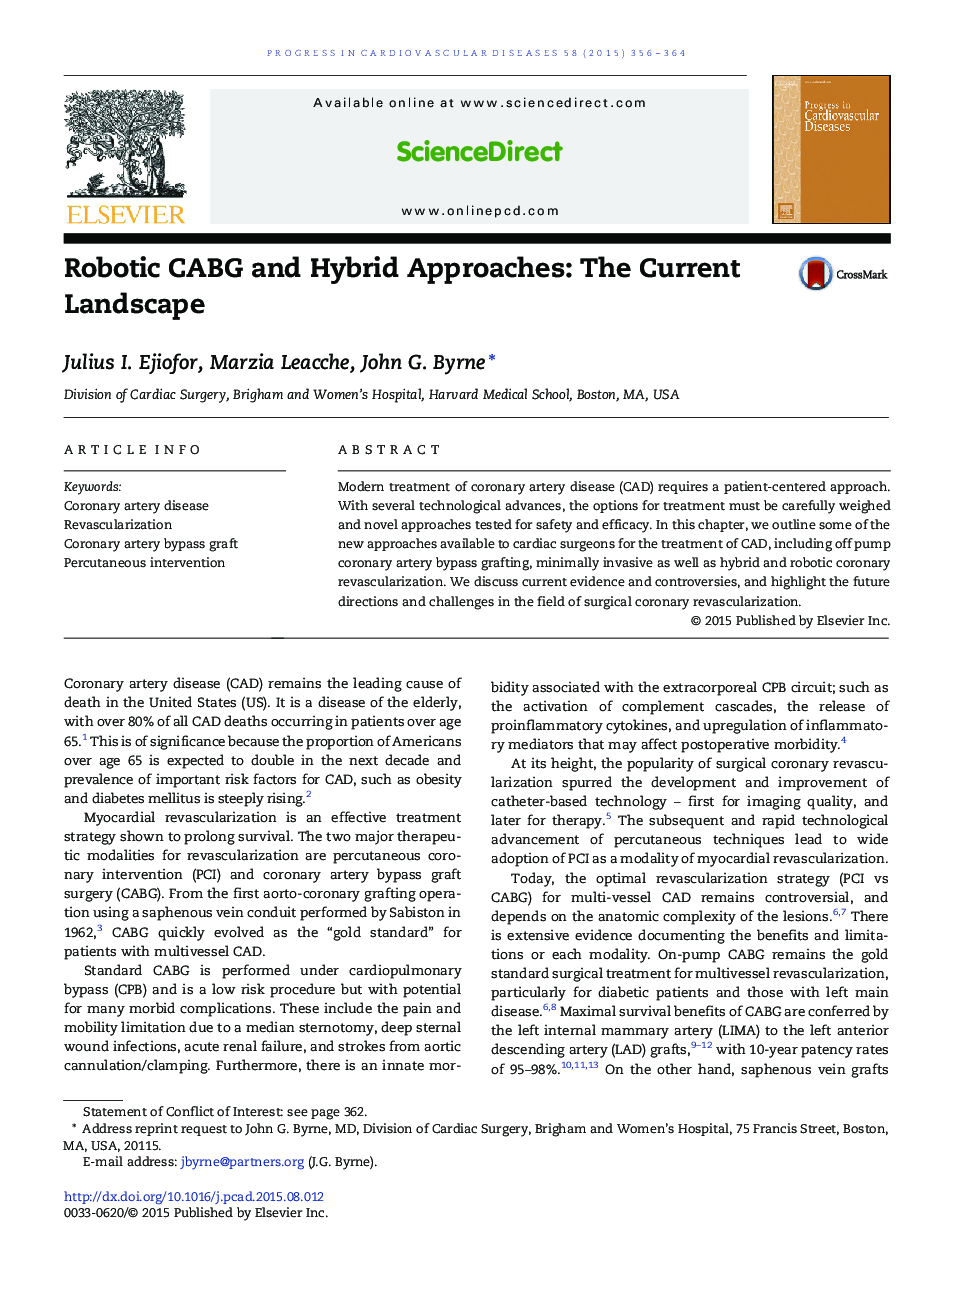 Robotic CABG and Hybrid Approaches: The Current Landscape 